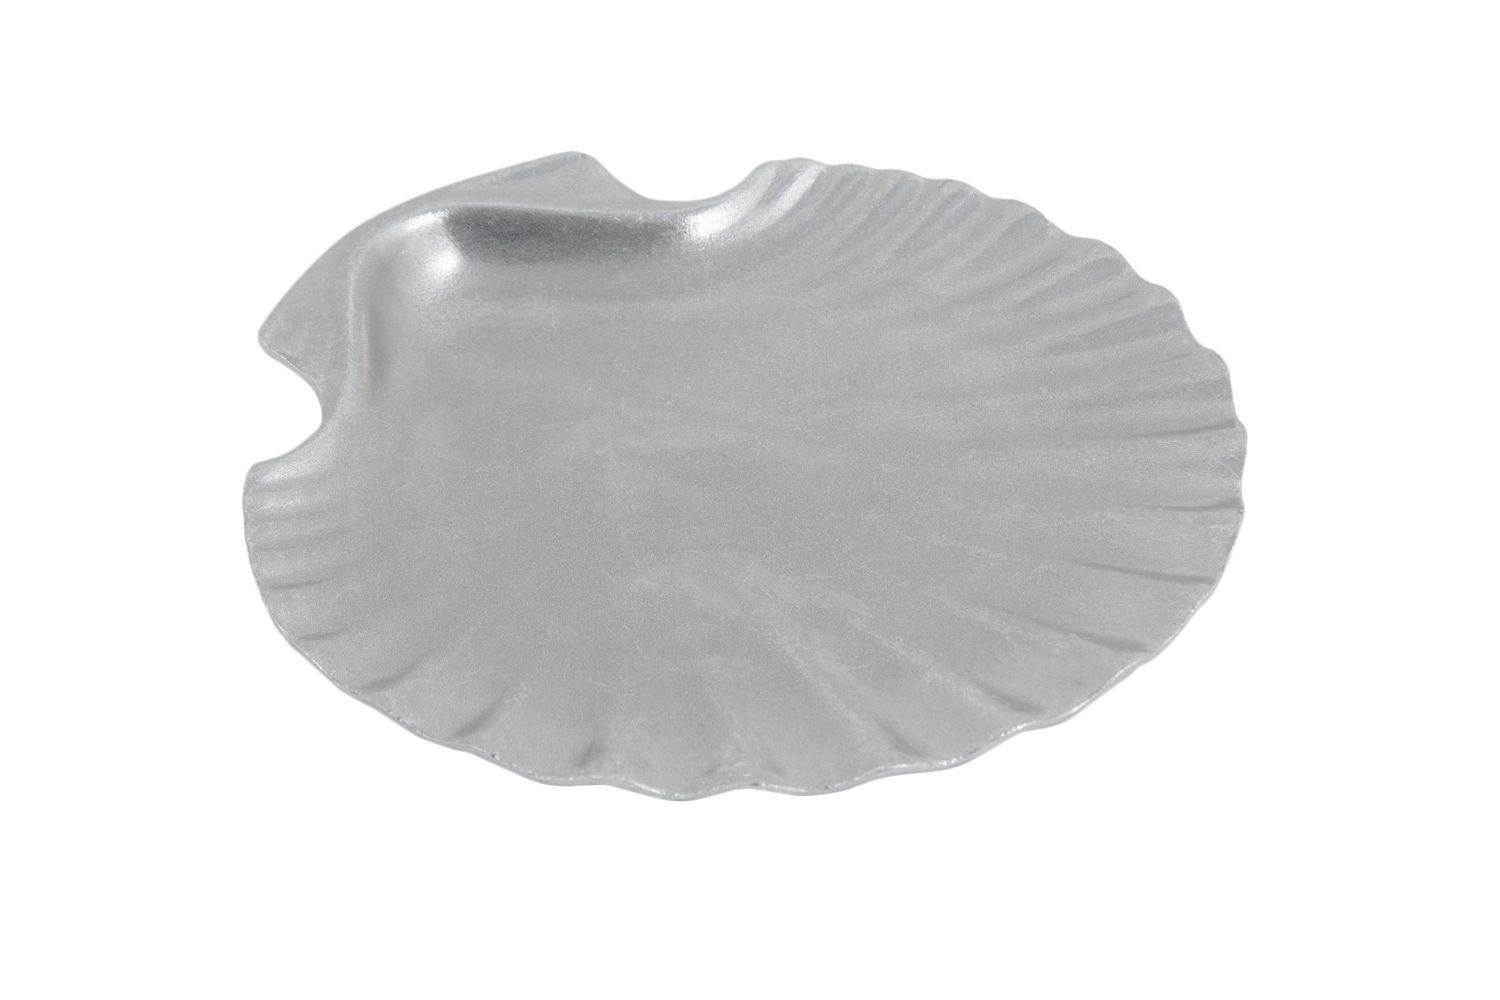 Bon Chef 5076P Serving Shell, Pewter Glo 8 1/4" Dia., Set of 6